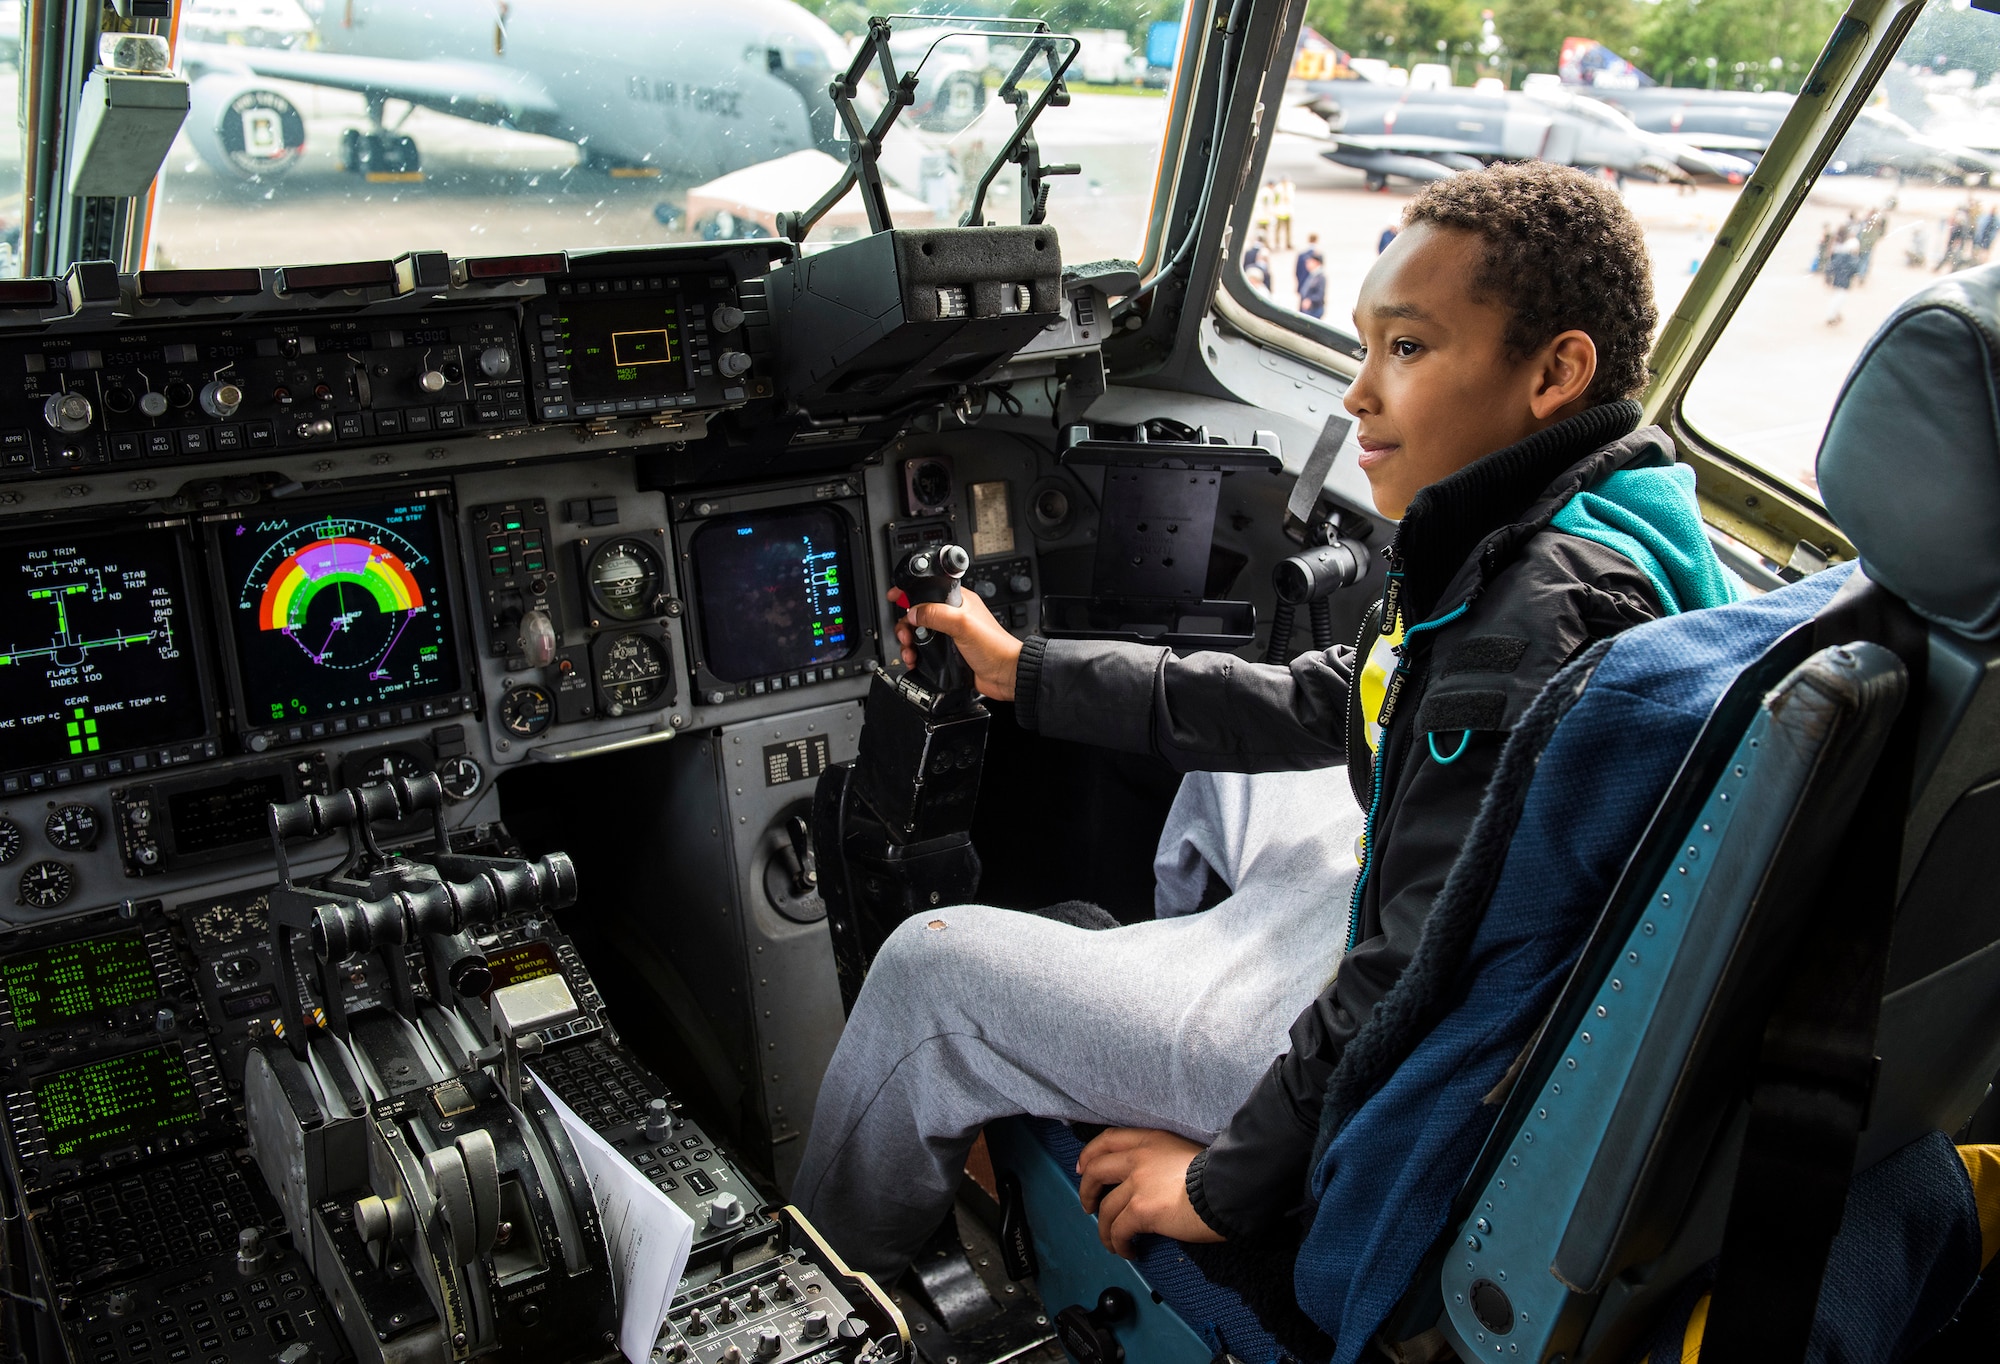 An air show attendee sits inside the cockpit of a U.S. Air Force C-17 Globemaster III static display from Charleston Air Force Base, South Carolina, during the 2019 Royal International Air Tattoo at RAF Fairford, England, July 20, 2019. This year's RIAT commemorated the 70th anniversary of NATO and highlighted the United States' enduring commitment to its European allies. (U.S. Air Force photo by Airman 1st Class Jennifer Zima)